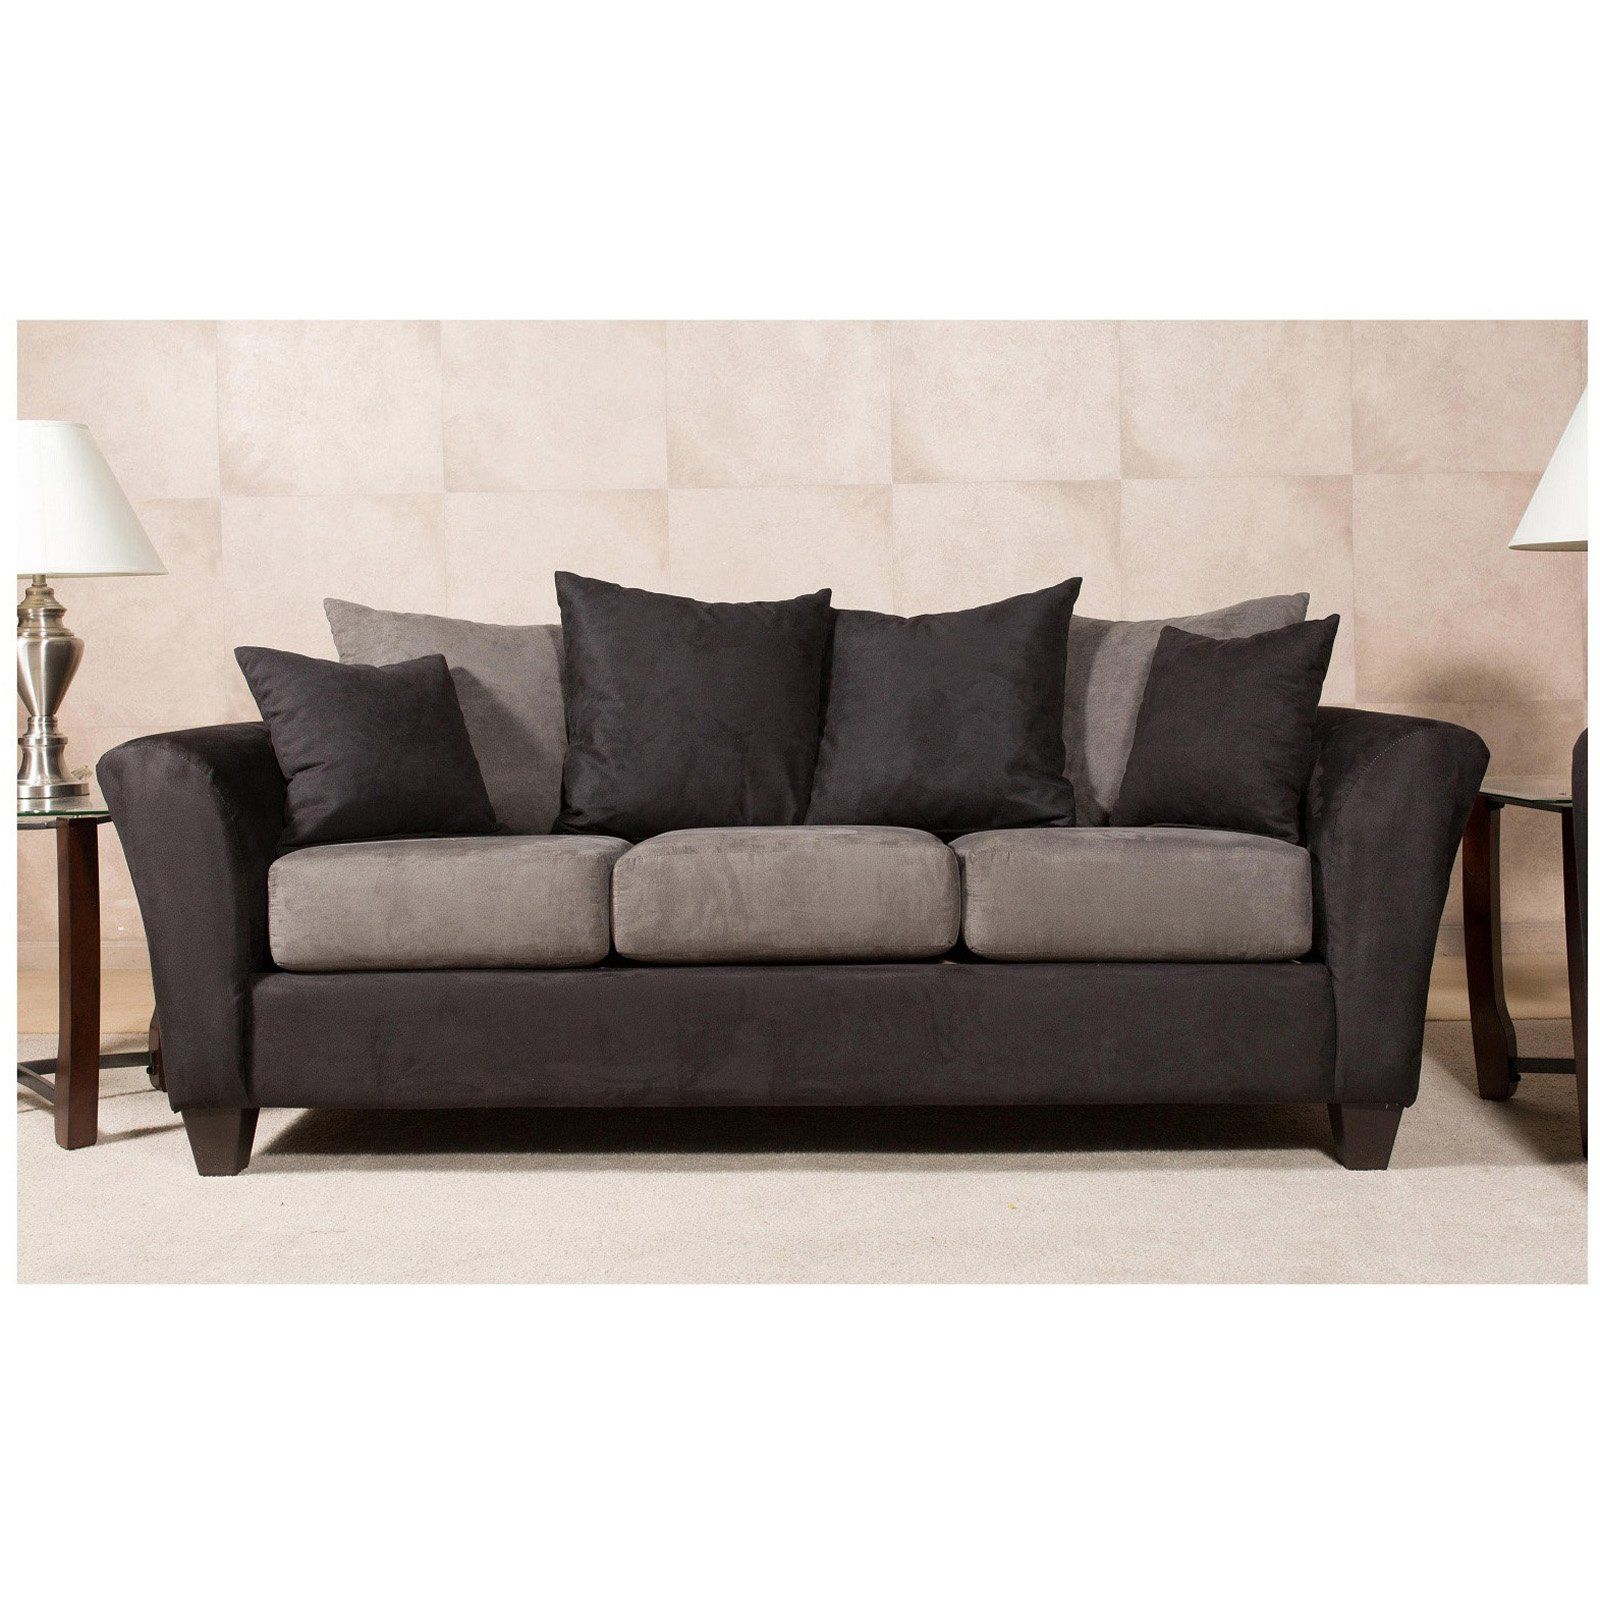 Chelsea Home Mansfield Sofa With 4 Accent Pillows – Walmart For Mansfield Beige Linen Sofa Chairs (Photo 16 of 20)